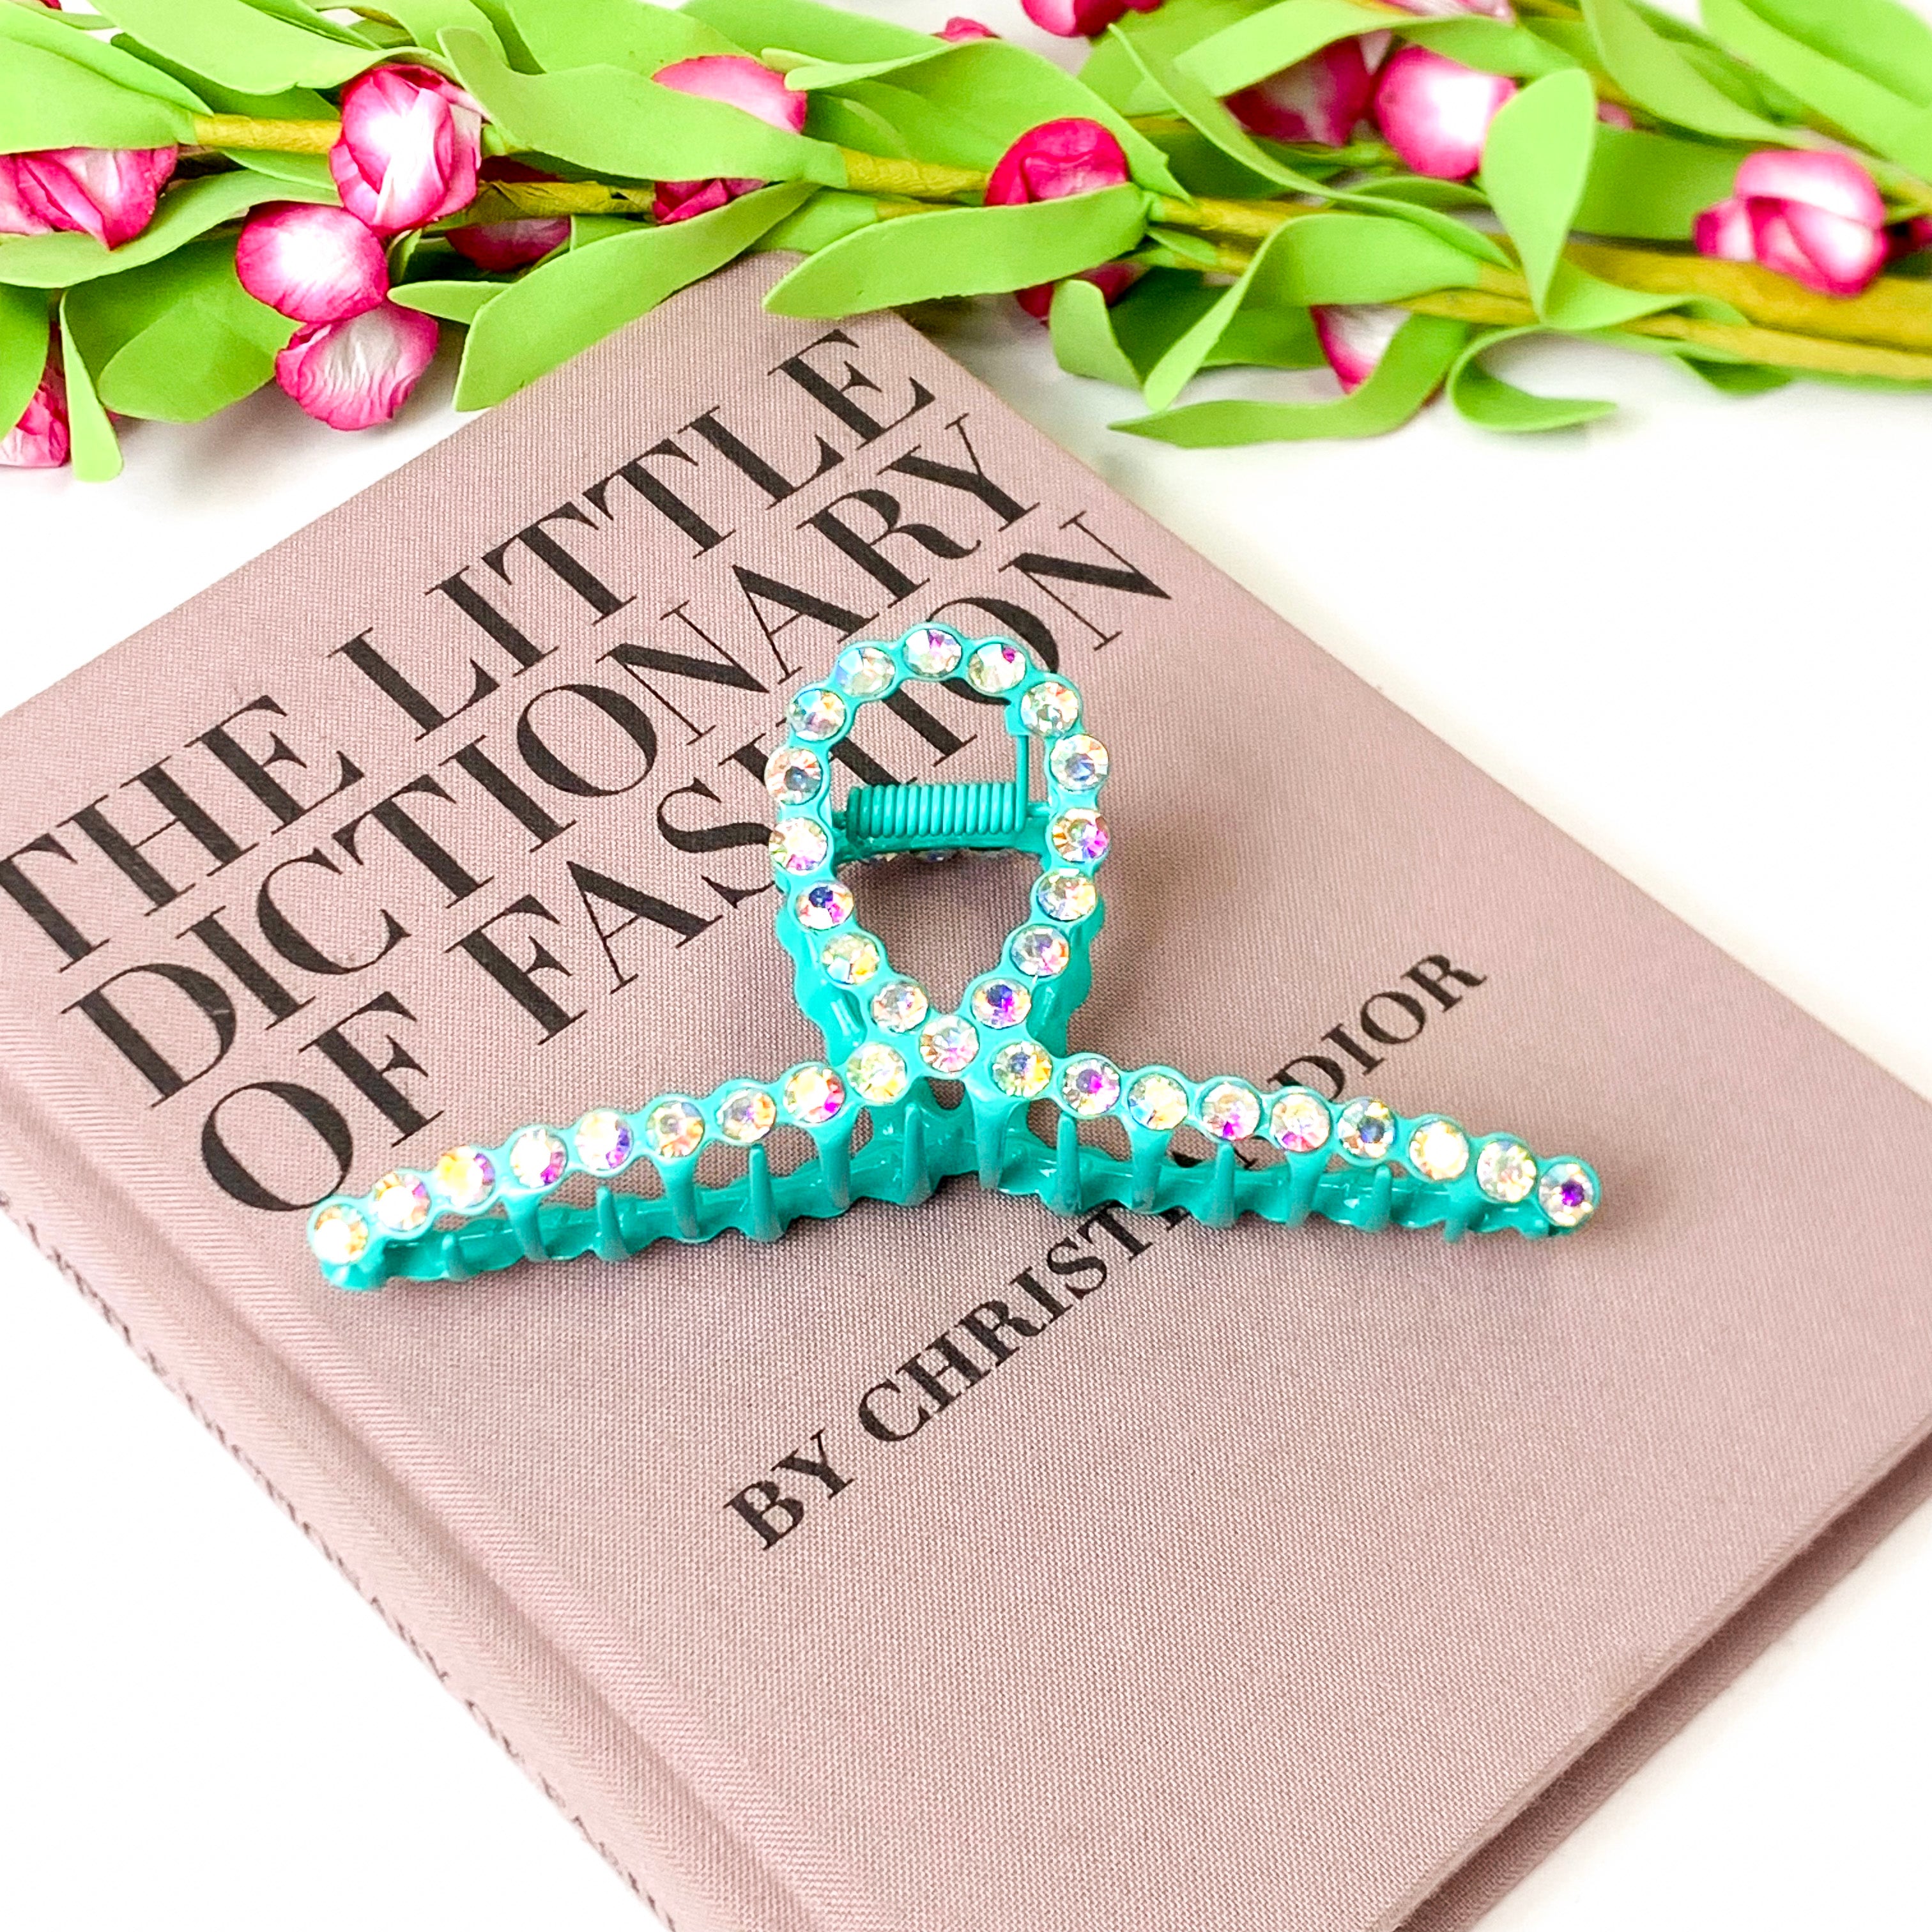 AB Rhinestone Embellished Loop Banana Hair Clip in Turquoise - Giddy Up Glamour Boutique